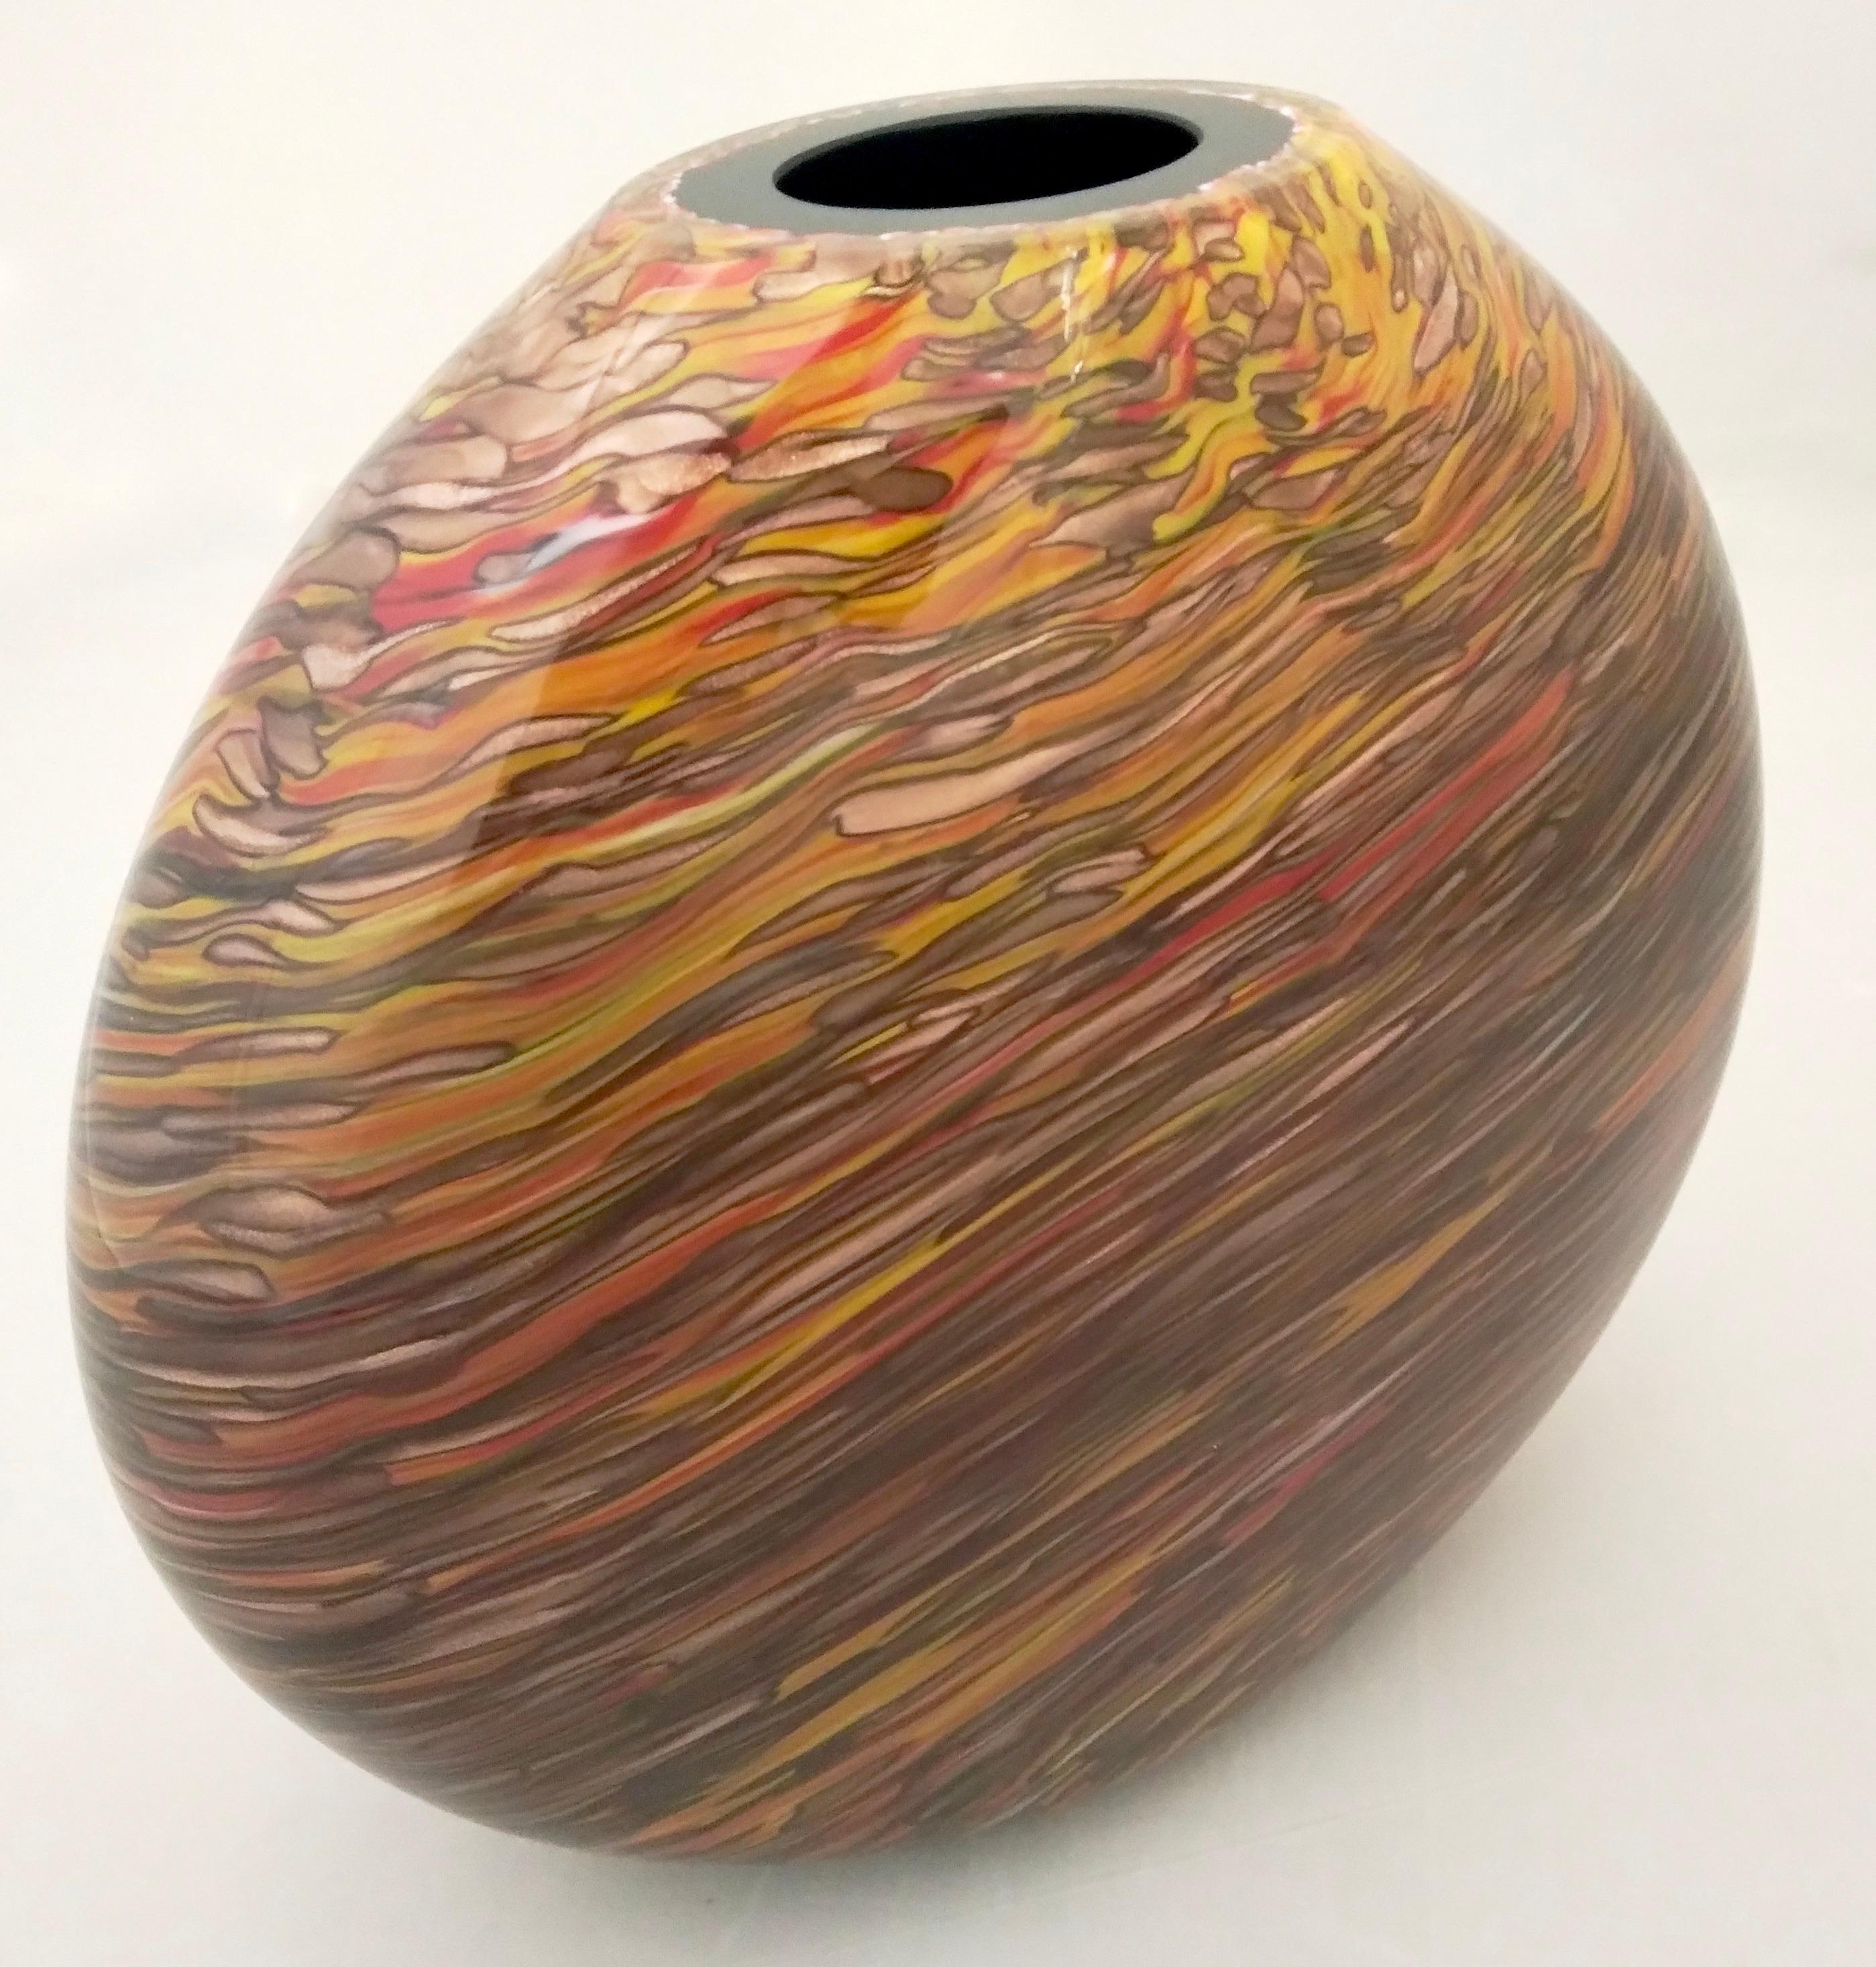 Formia 1980s Modern Elliptical Brown Yellow Red Orange Gold Murano Glass Vase For Sale 7